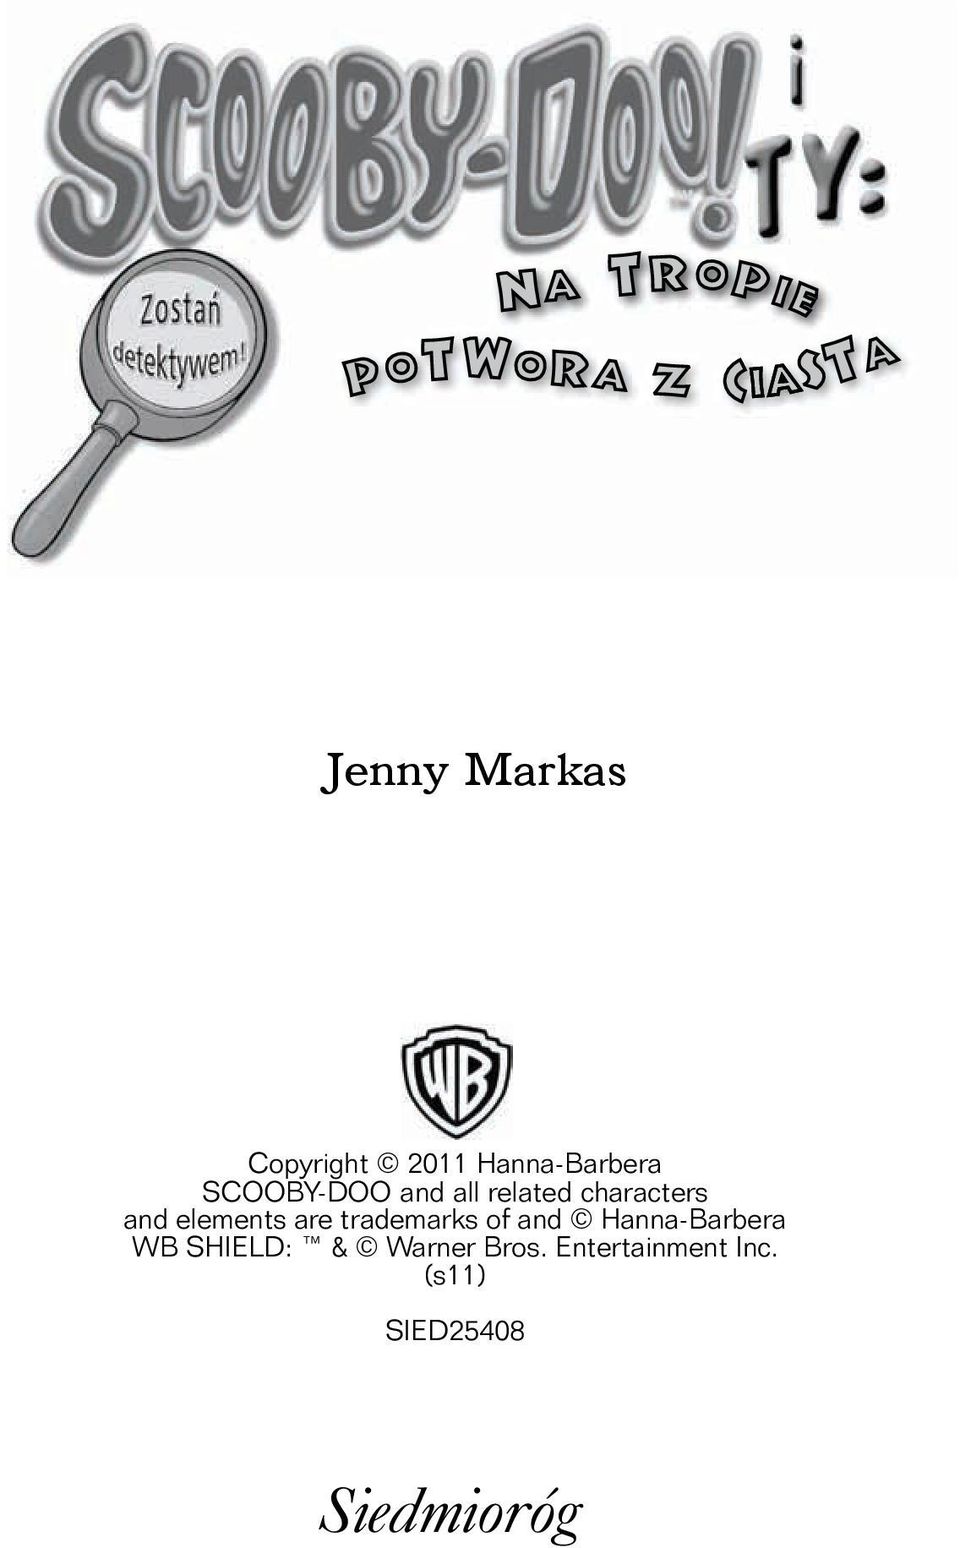 elements are trademarks of and Hanna-Barbera WB